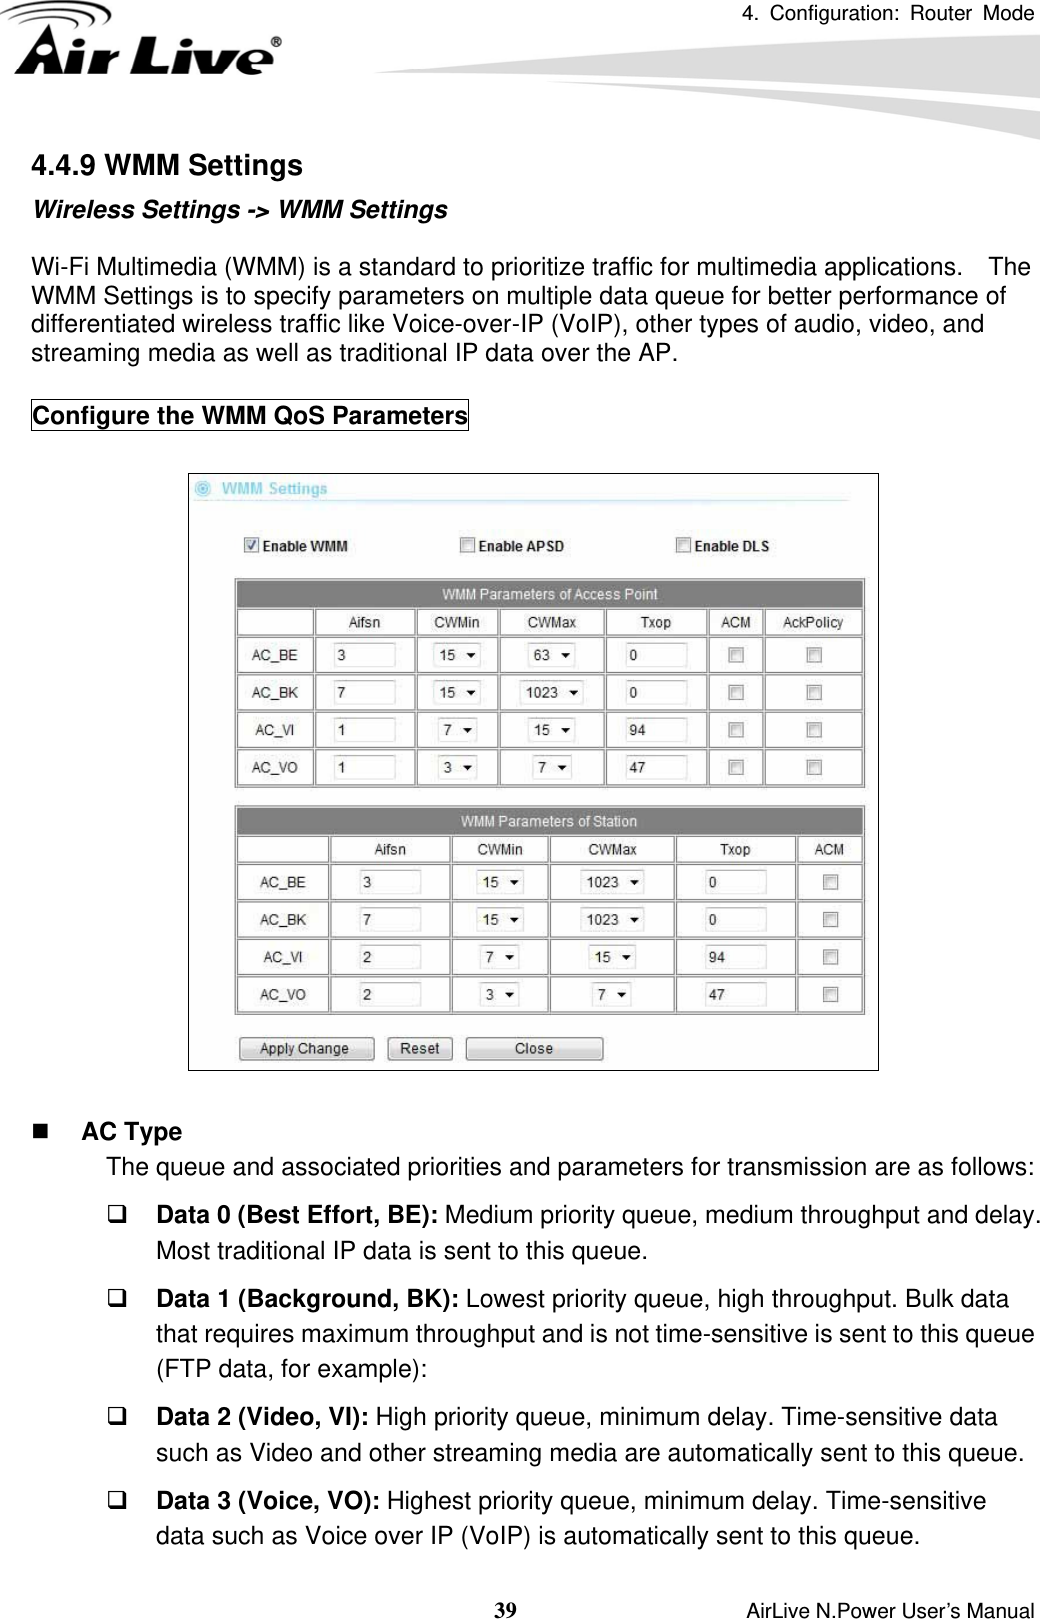 4. Configuration: Router Mode   39                    AirLive N.Power User’s Manual 4.4.9 WMM Settings Wireless Settings -&gt; WMM Settings  Wi-Fi Multimedia (WMM) is a standard to prioritize traffic for multimedia applications.    The WMM Settings is to specify parameters on multiple data queue for better performance of differentiated wireless traffic like Voice-over-IP (VoIP), other types of audio, video, and streaming media as well as traditional IP data over the AP.  Configure the WMM QoS Parameters     AC Type The queue and associated priorities and parameters for transmission are as follows:  Data 0 (Best Effort, BE): Medium priority queue, medium throughput and delay. Most traditional IP data is sent to this queue.  Data 1 (Background, BK): Lowest priority queue, high throughput. Bulk data that requires maximum throughput and is not time-sensitive is sent to this queue (FTP data, for example):  Data 2 (Video, VI): High priority queue, minimum delay. Time-sensitive data such as Video and other streaming media are automatically sent to this queue.  Data 3 (Voice, VO): Highest priority queue, minimum delay. Time-sensitive data such as Voice over IP (VoIP) is automatically sent to this queue. 